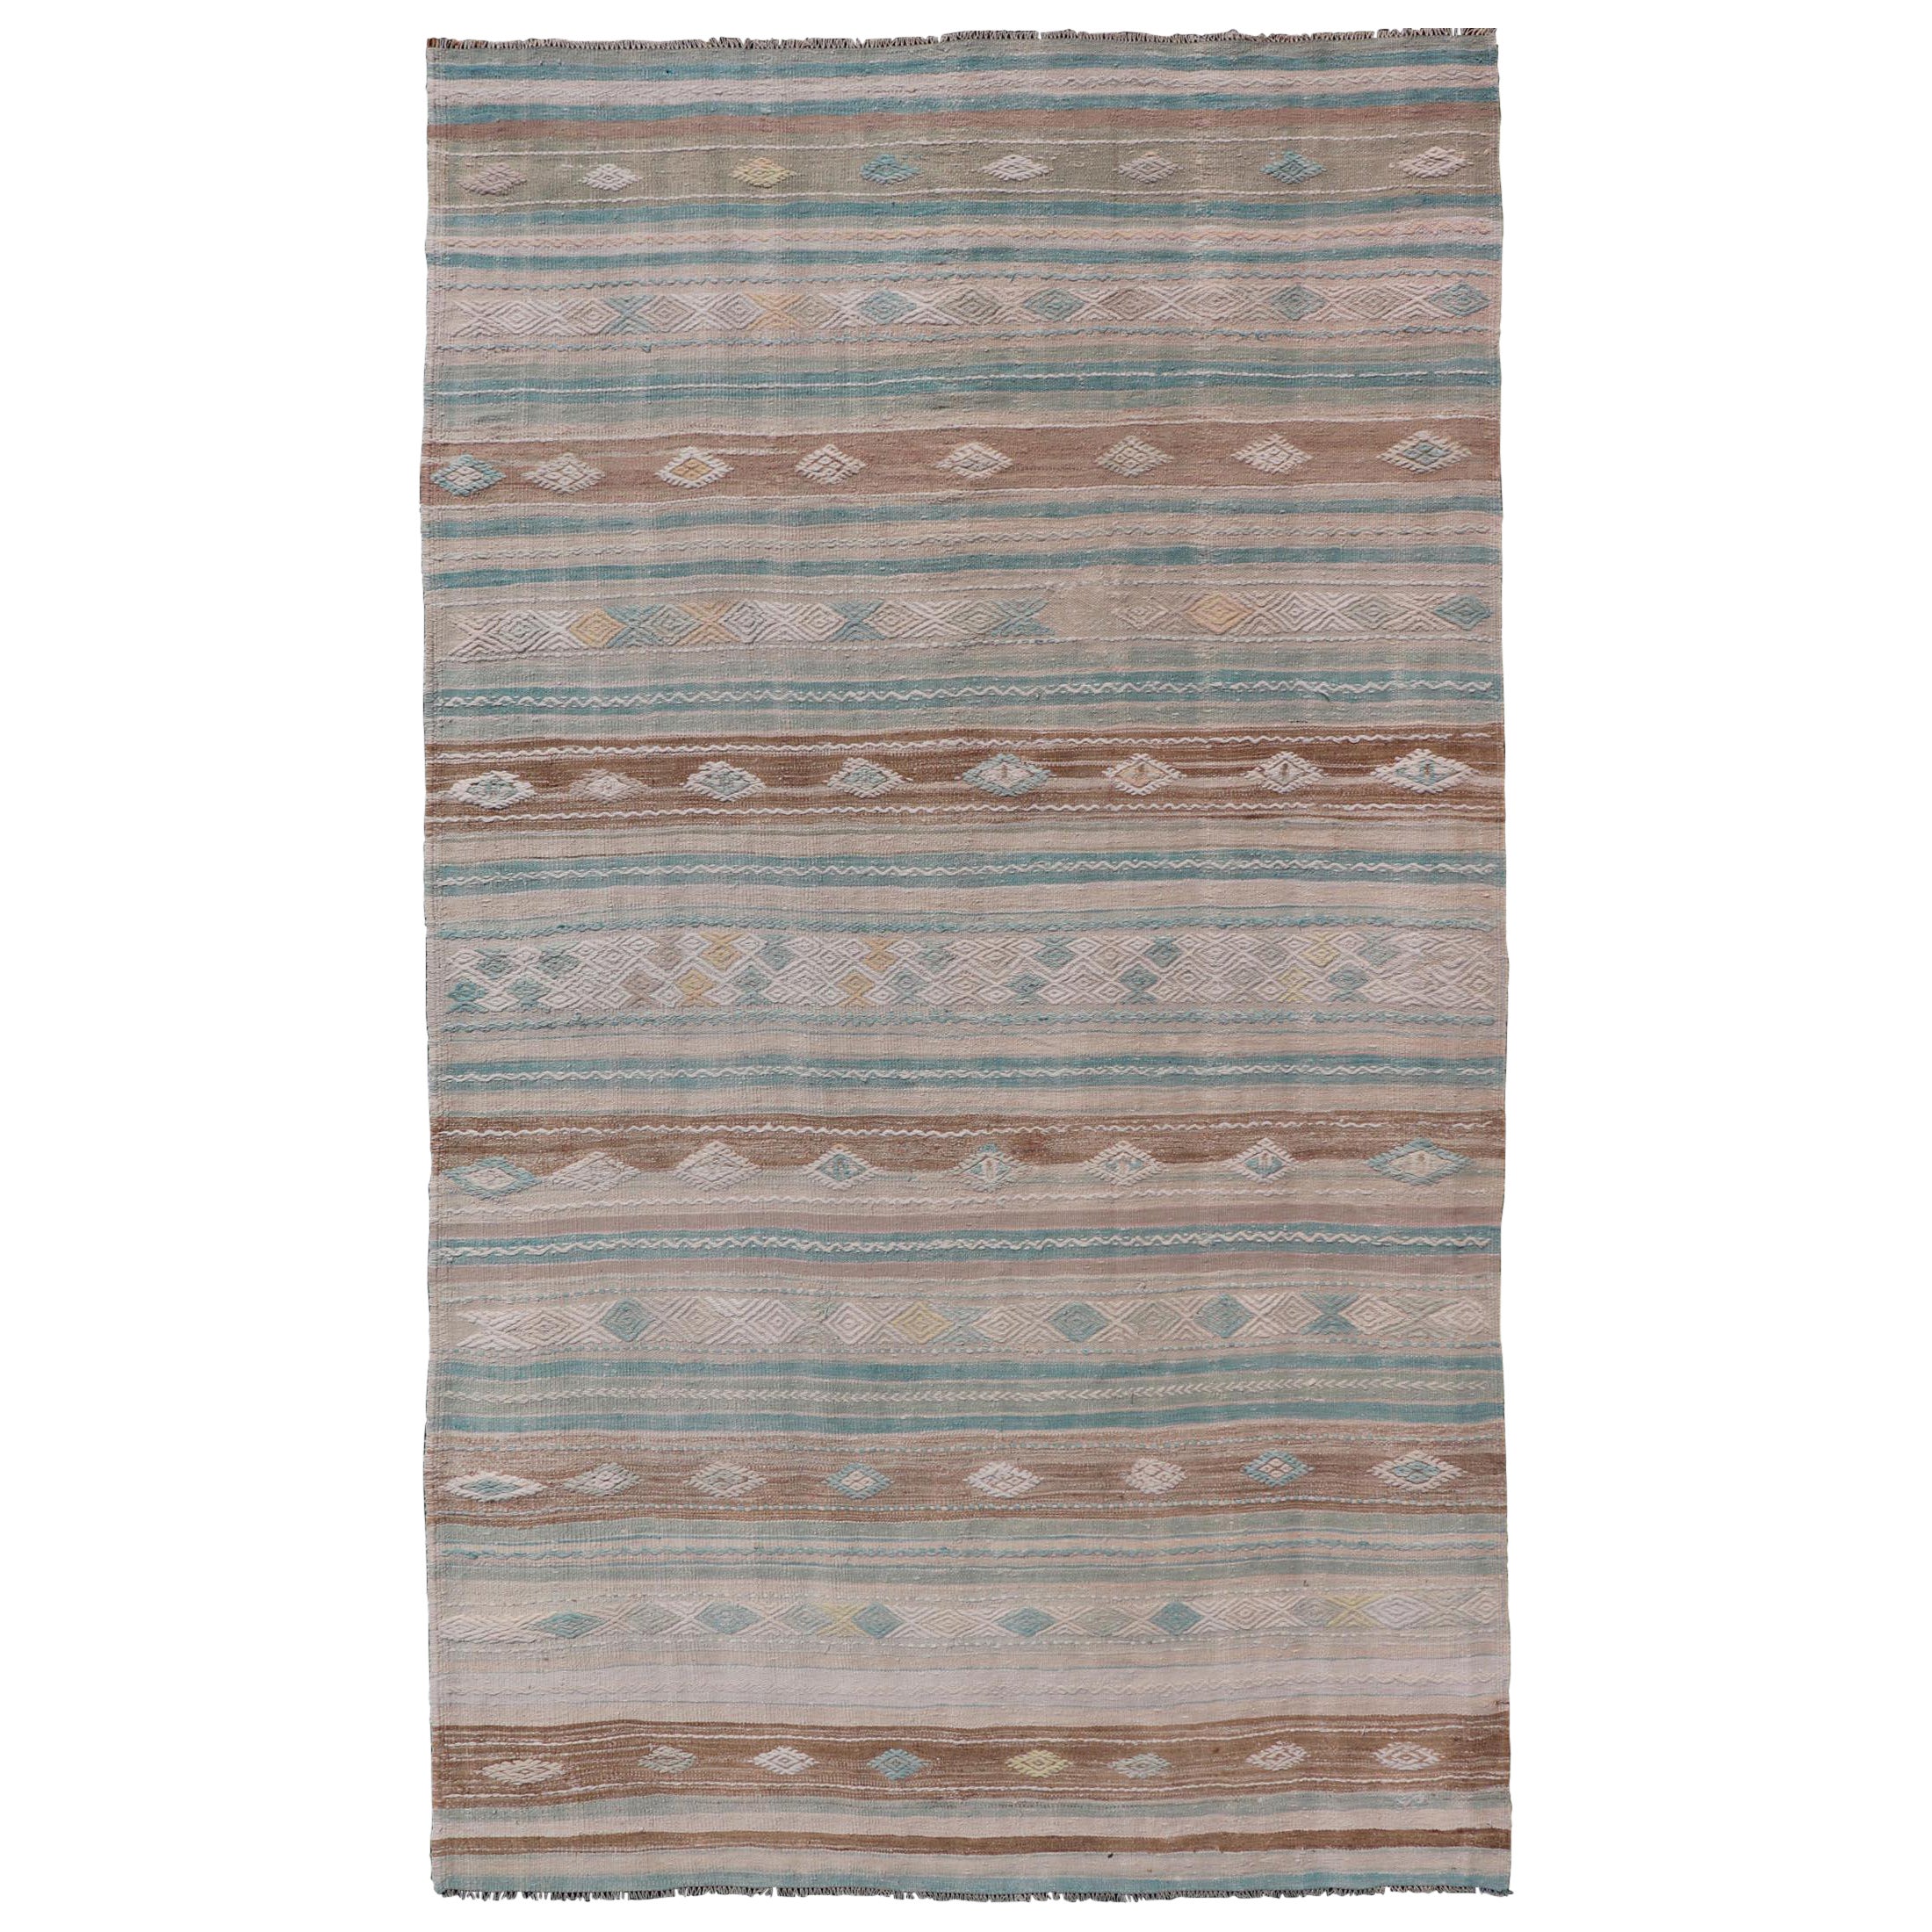 Striped Turkish Hand Woven Flat-Weave Kilim in Muted Colors and Tribal Motifs